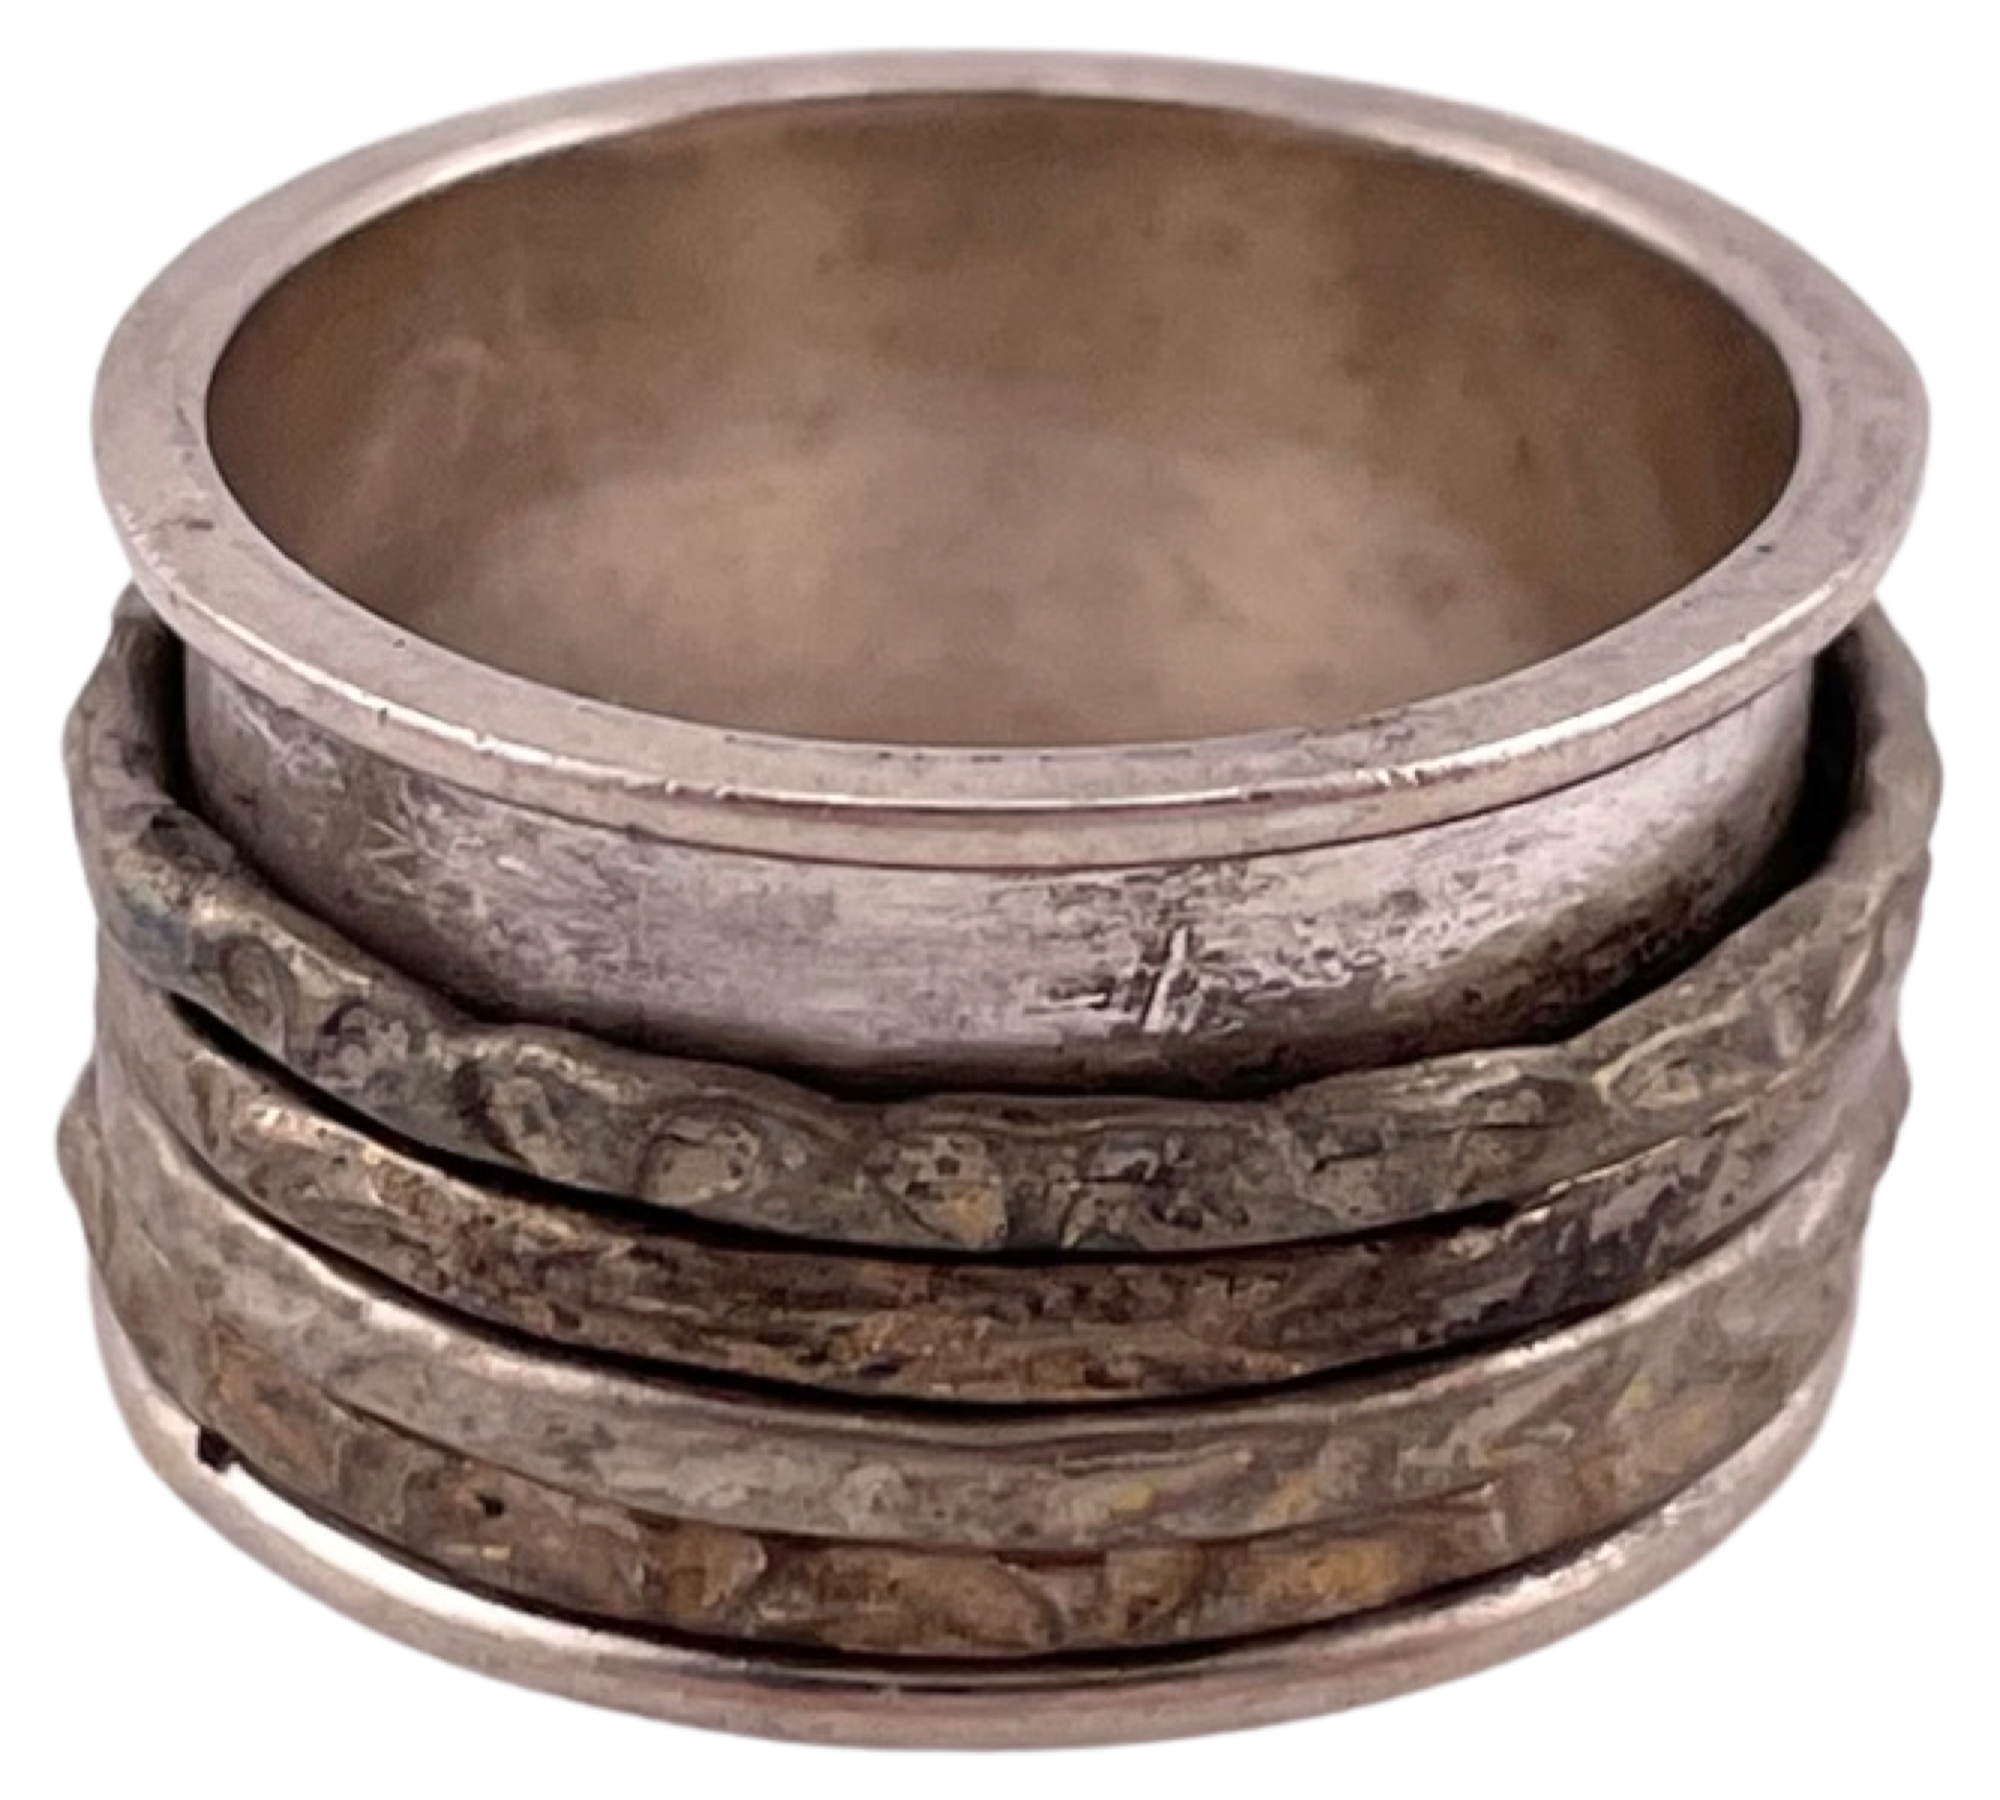 size 6.75 sterling silver wide band spinner ring